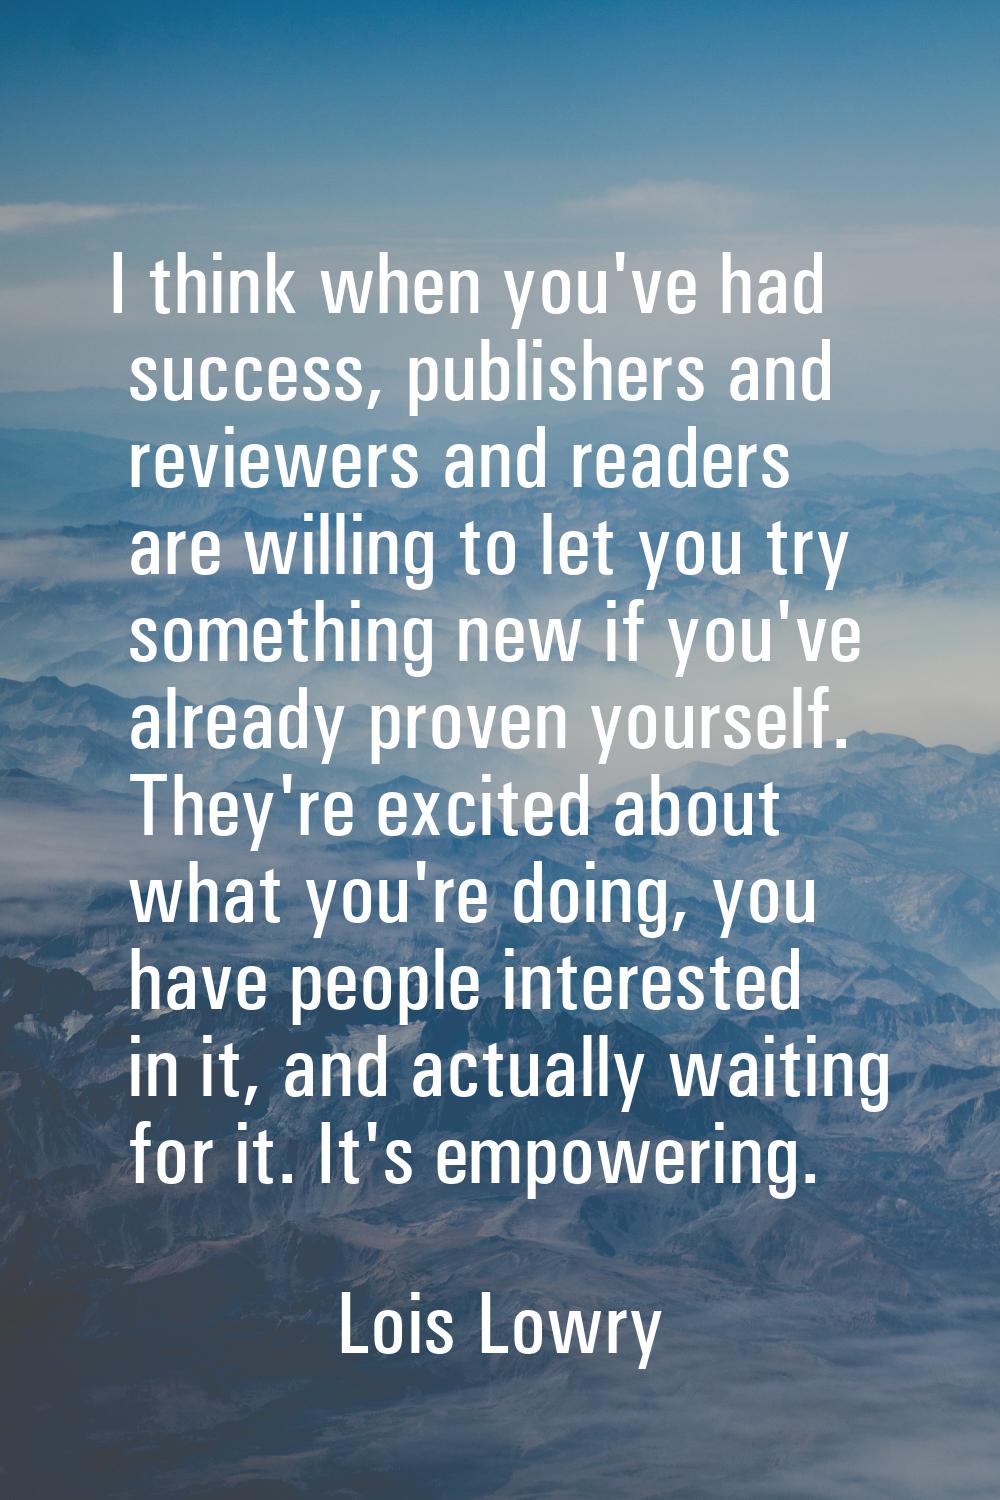 I think when you've had success, publishers and reviewers and readers are willing to let you try so